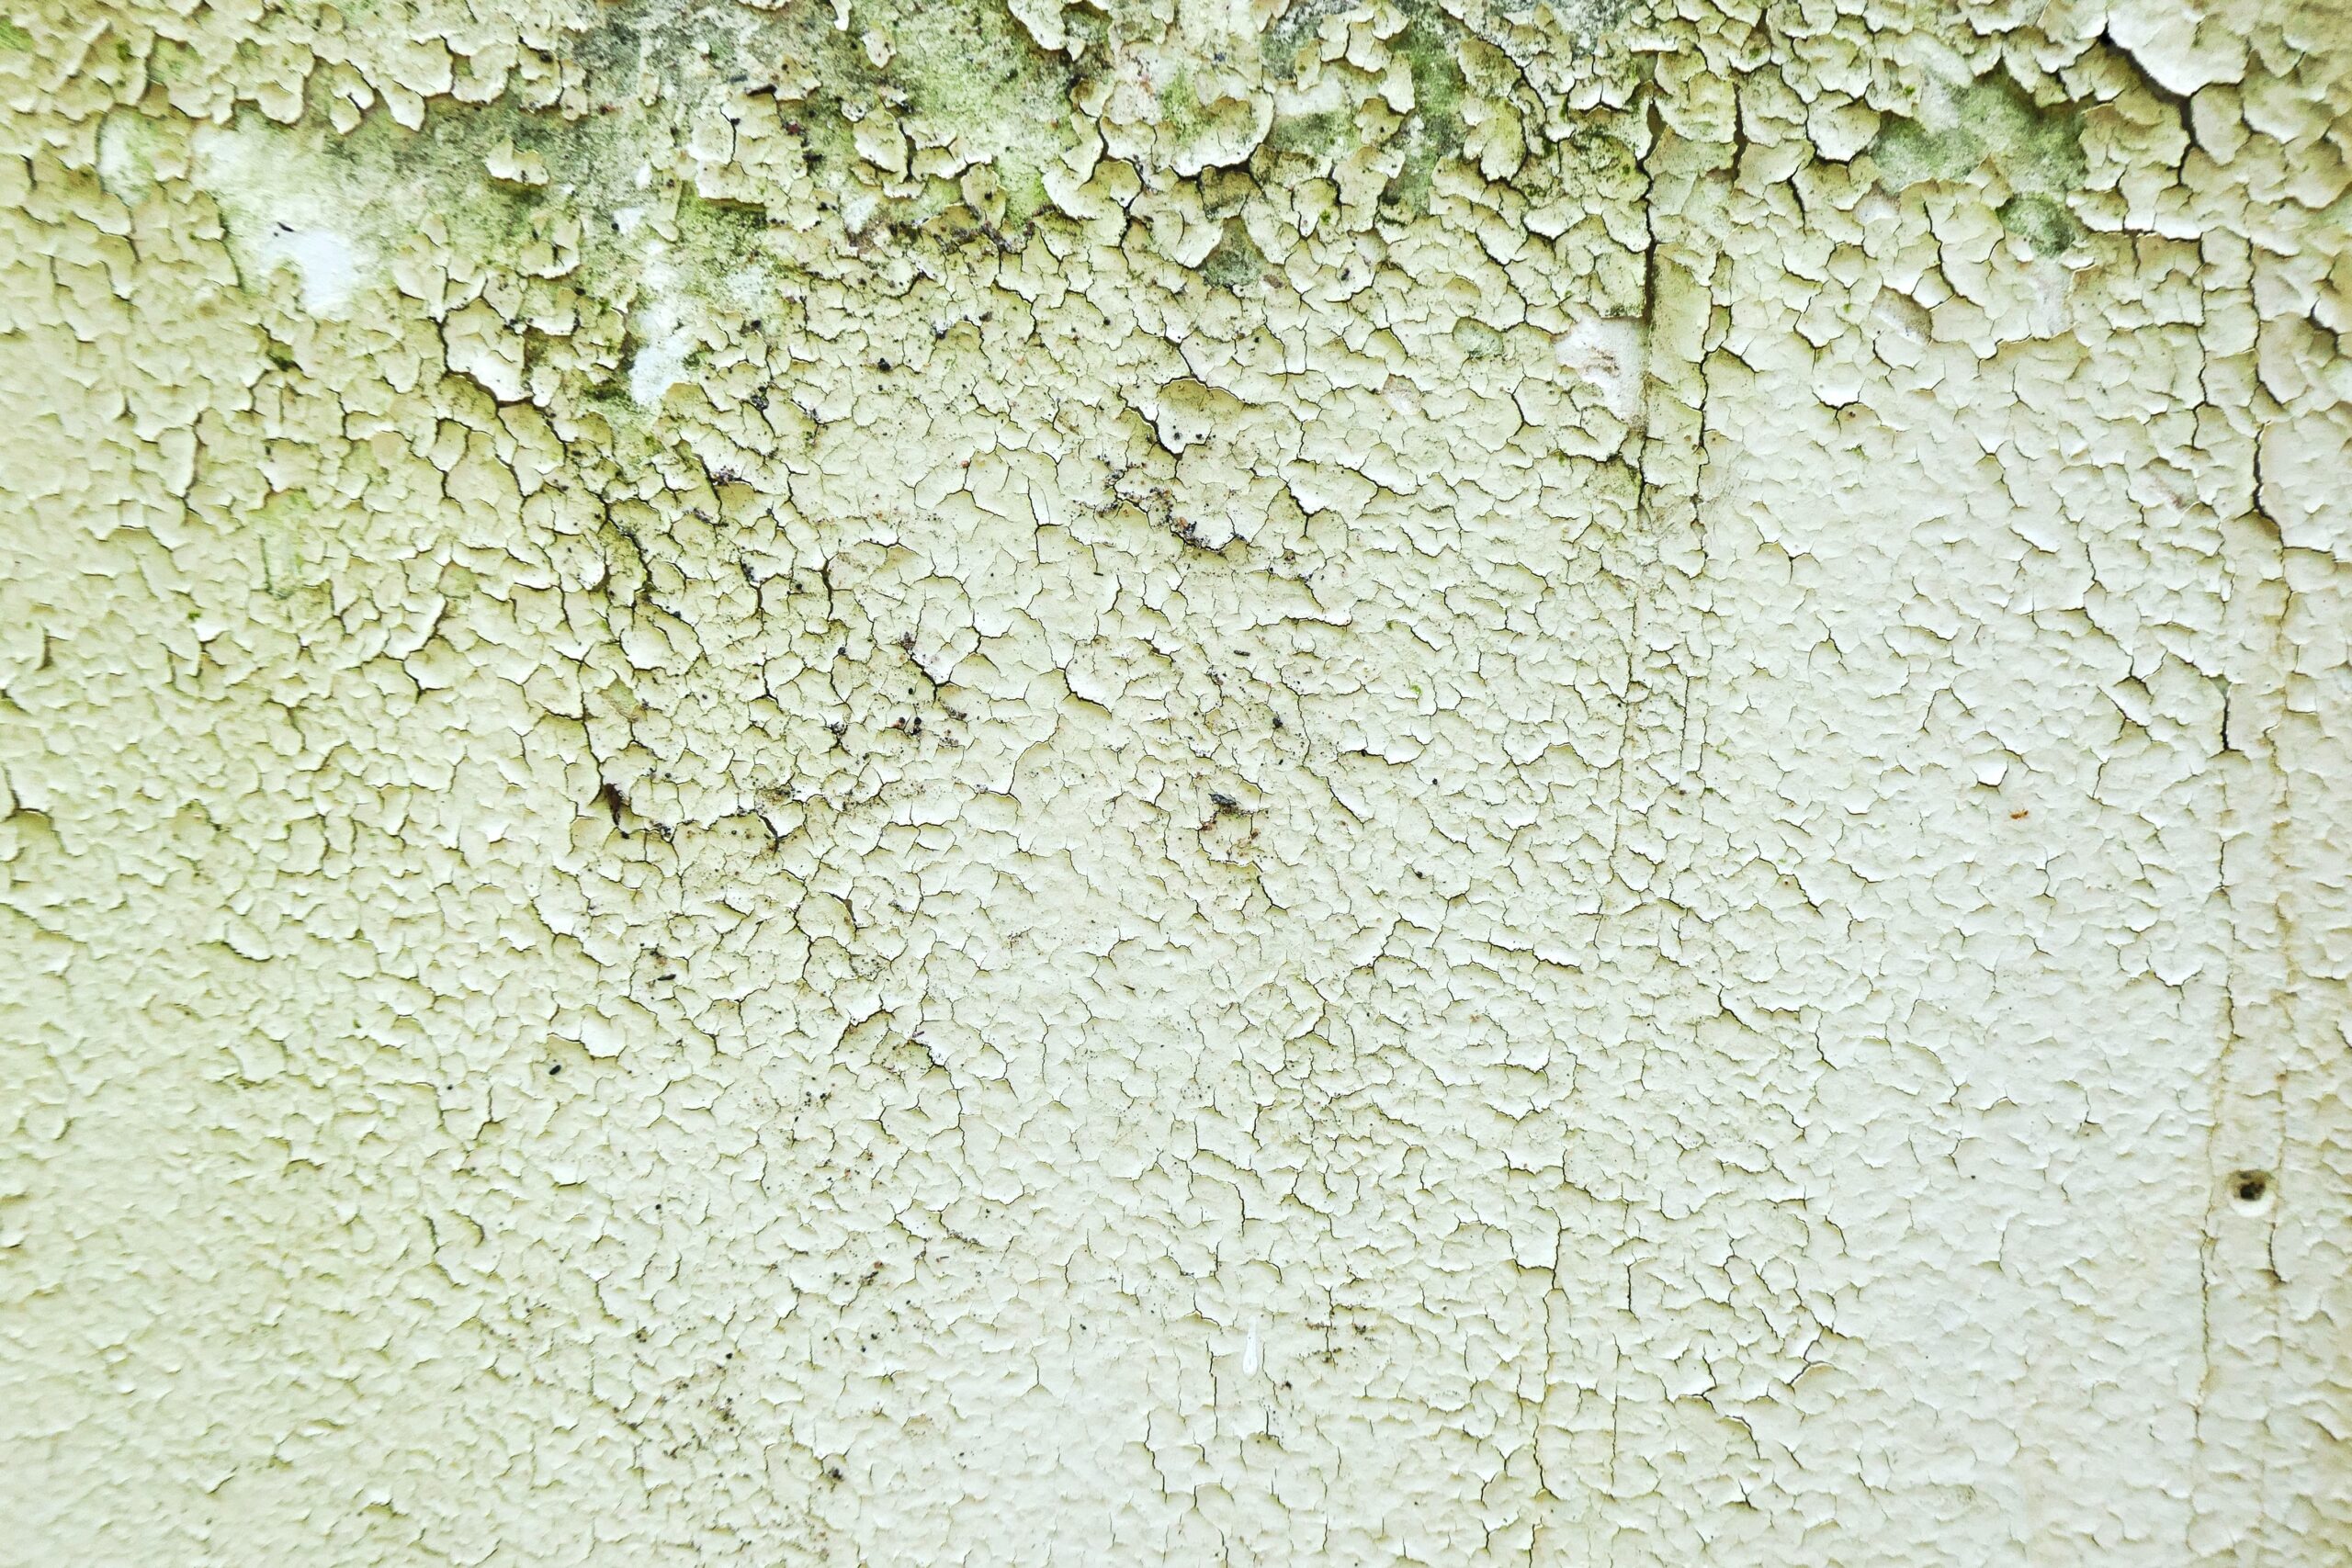 If you recently found mold inside your home, then you need to consult a professional mold remediation company for help.